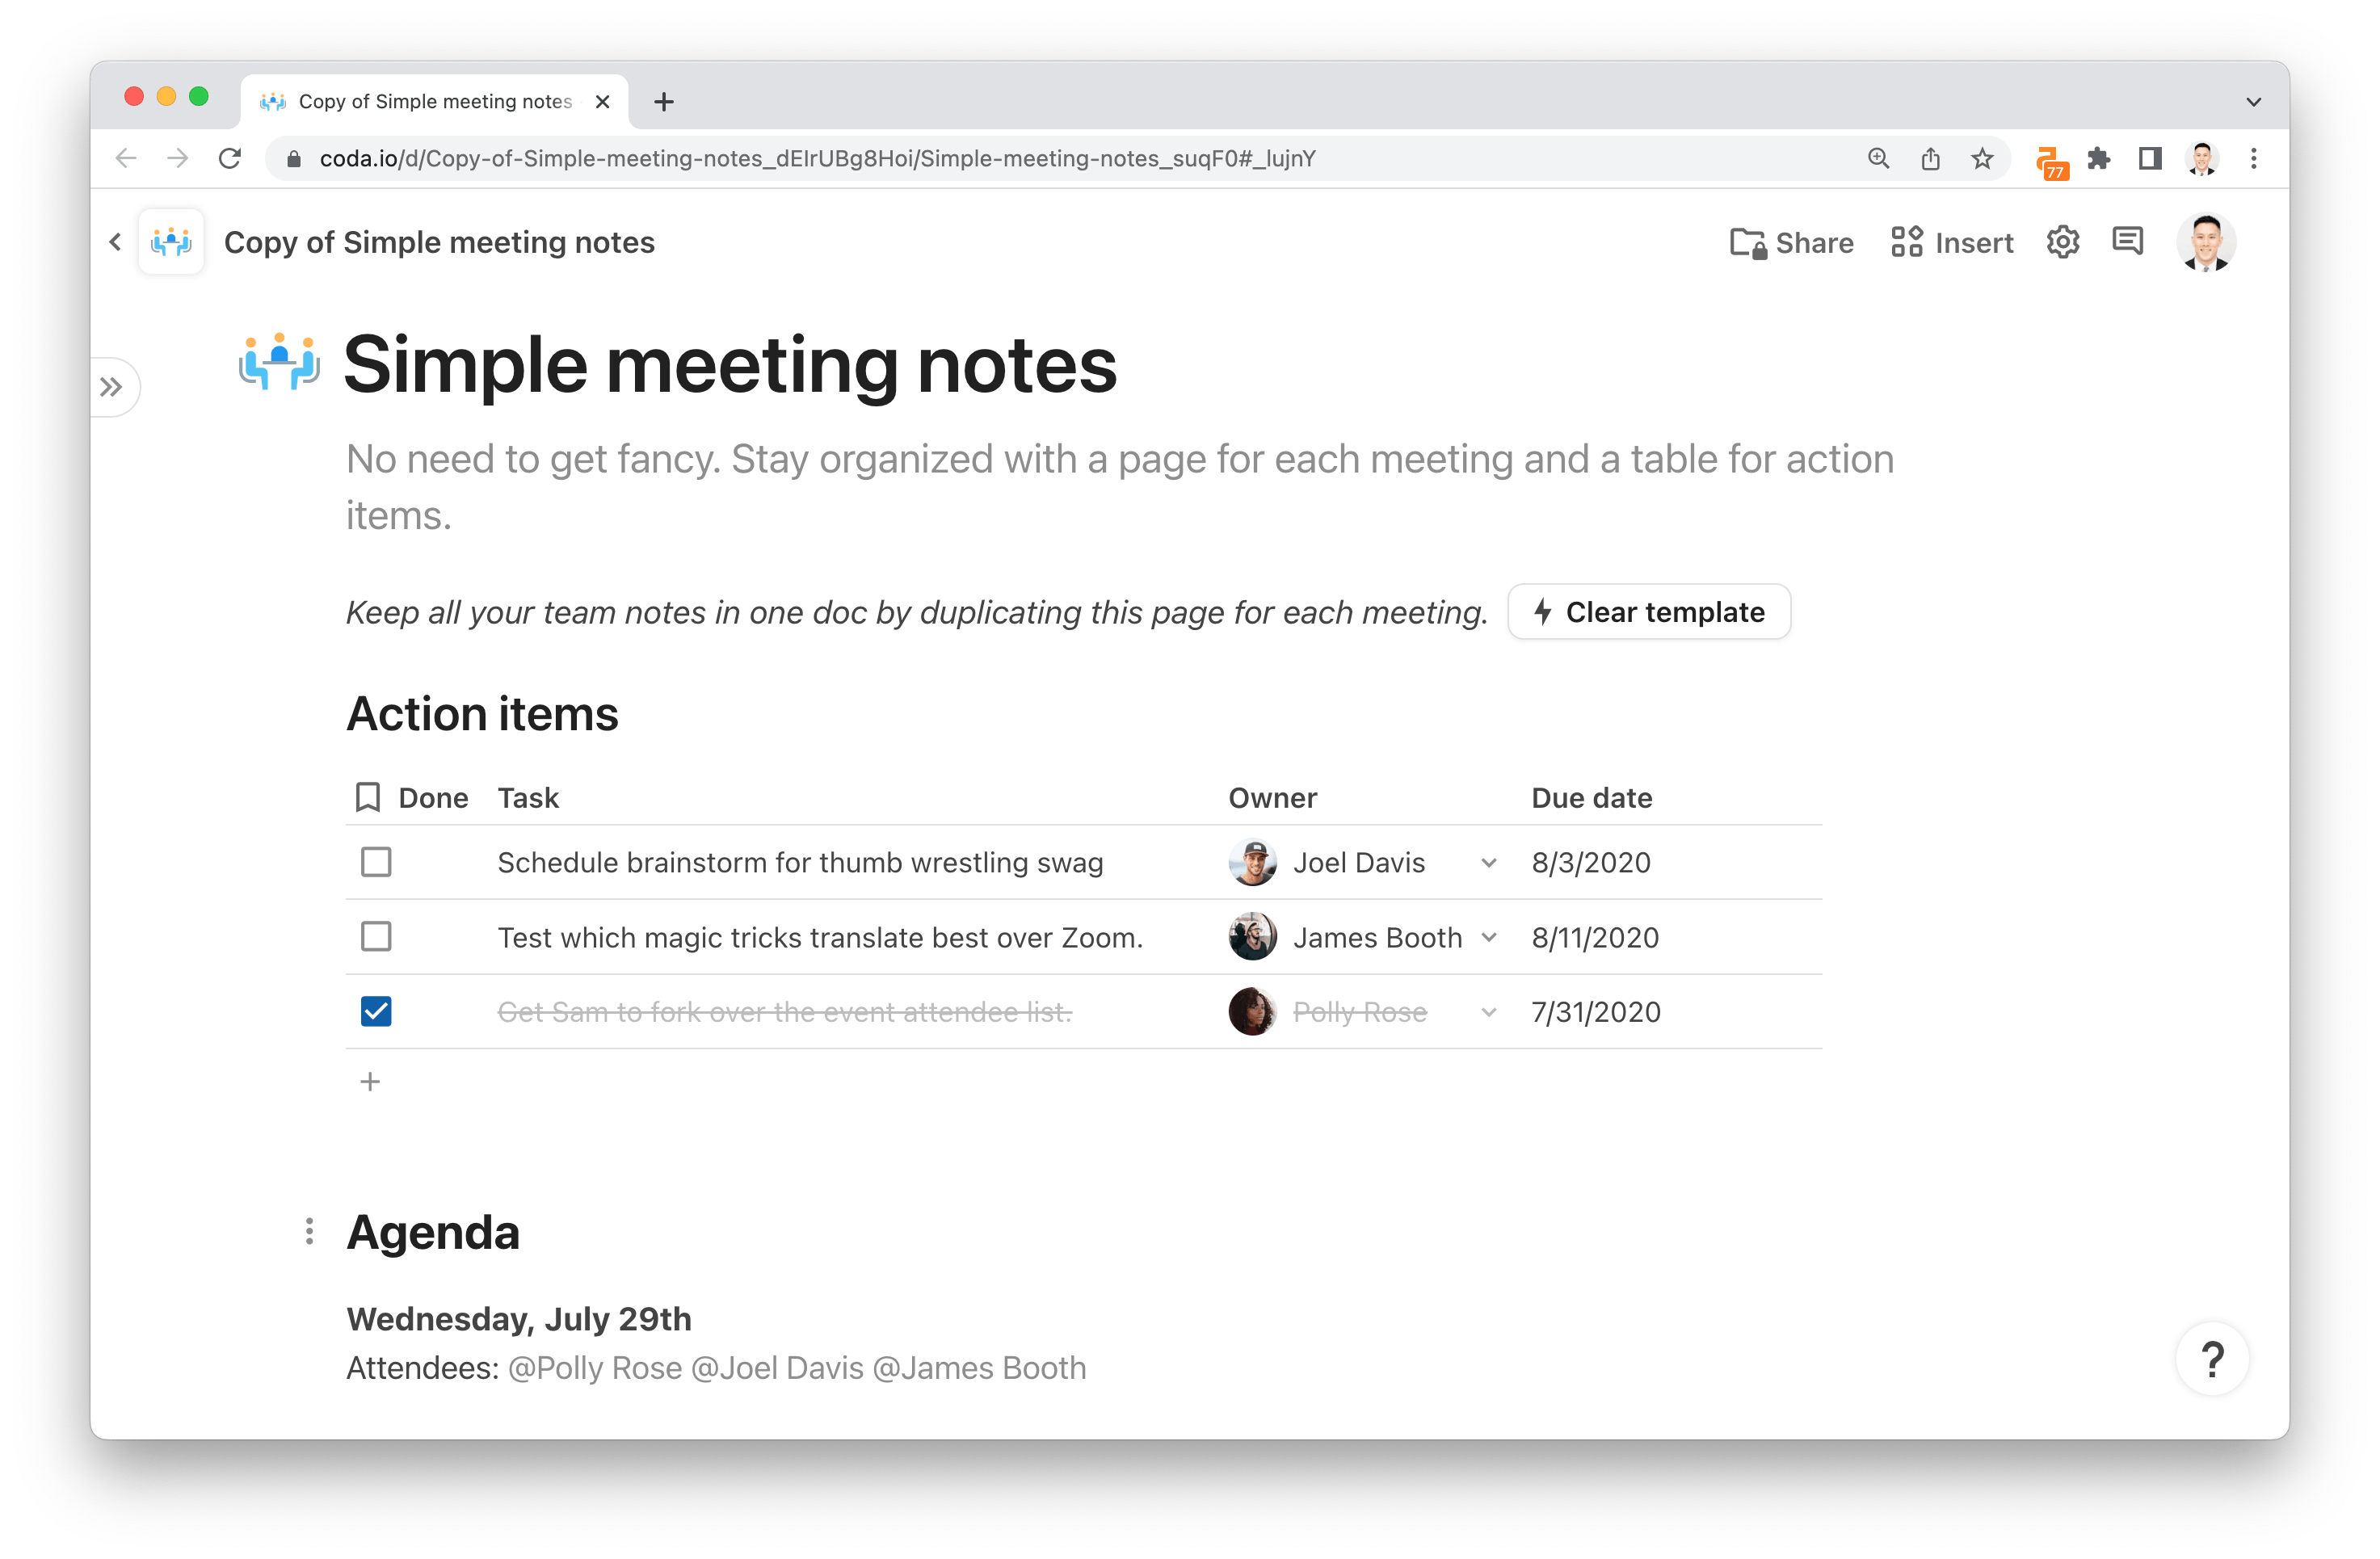 Free simple meeting notes template in Coda - stay organized with meeting notes and action items in one place